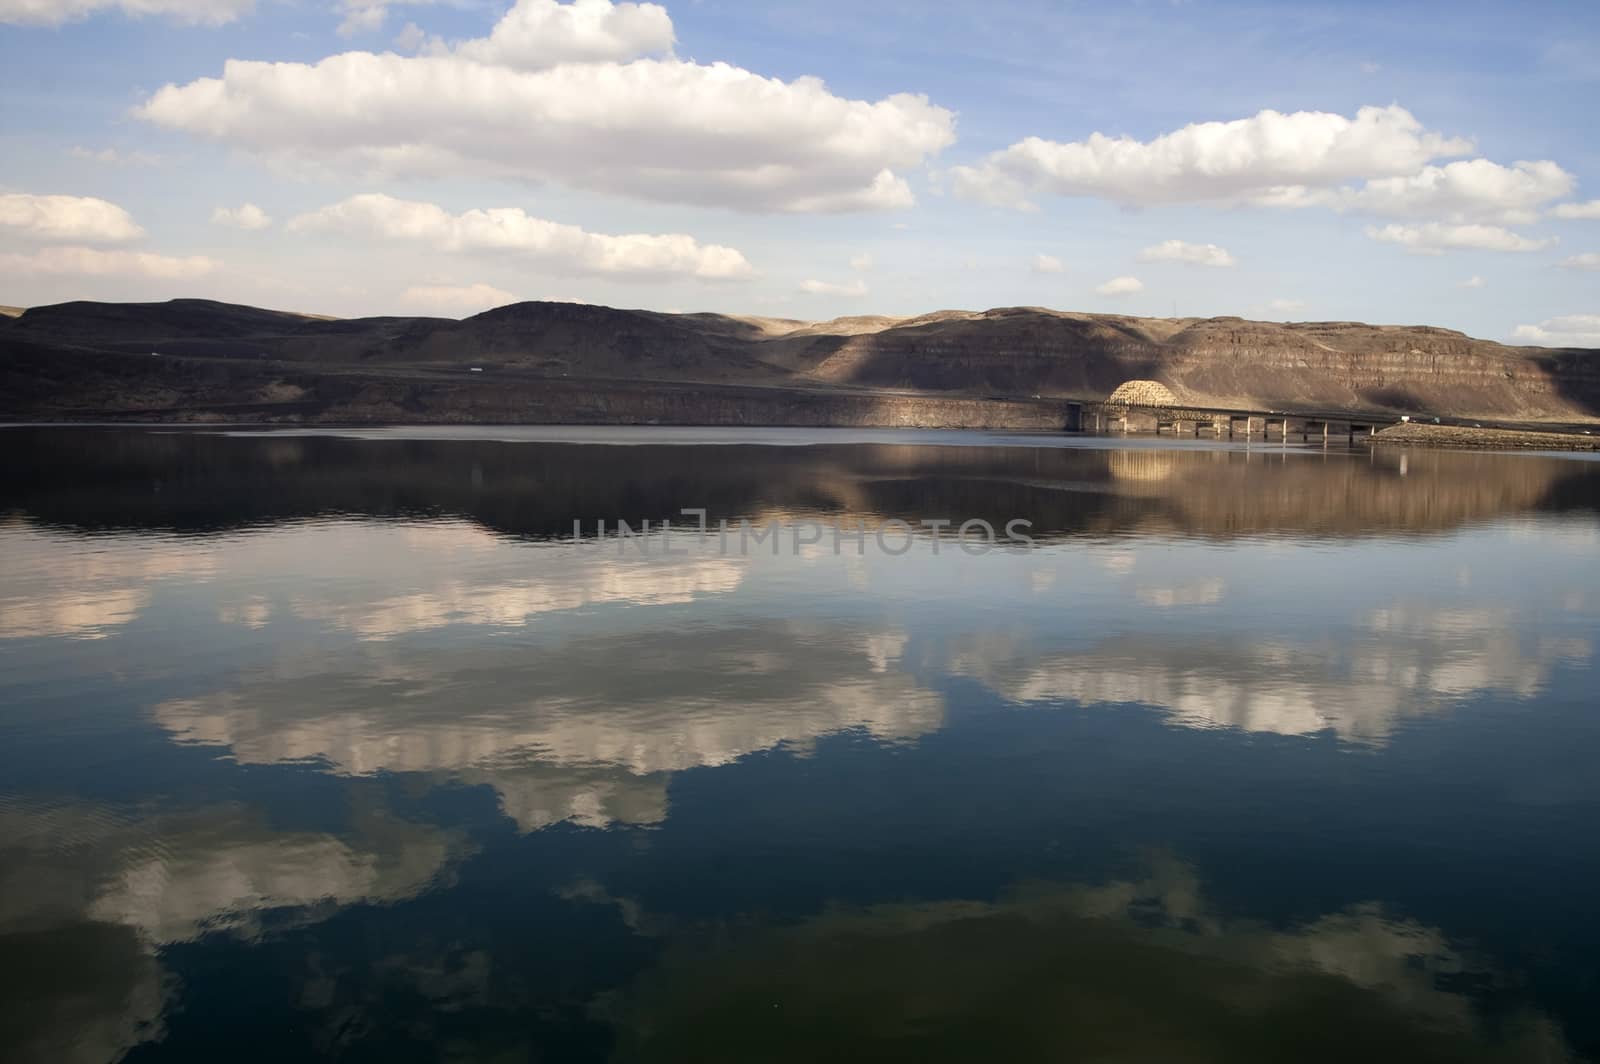 Smooth water produces a beautiful reflection in the Columbia River